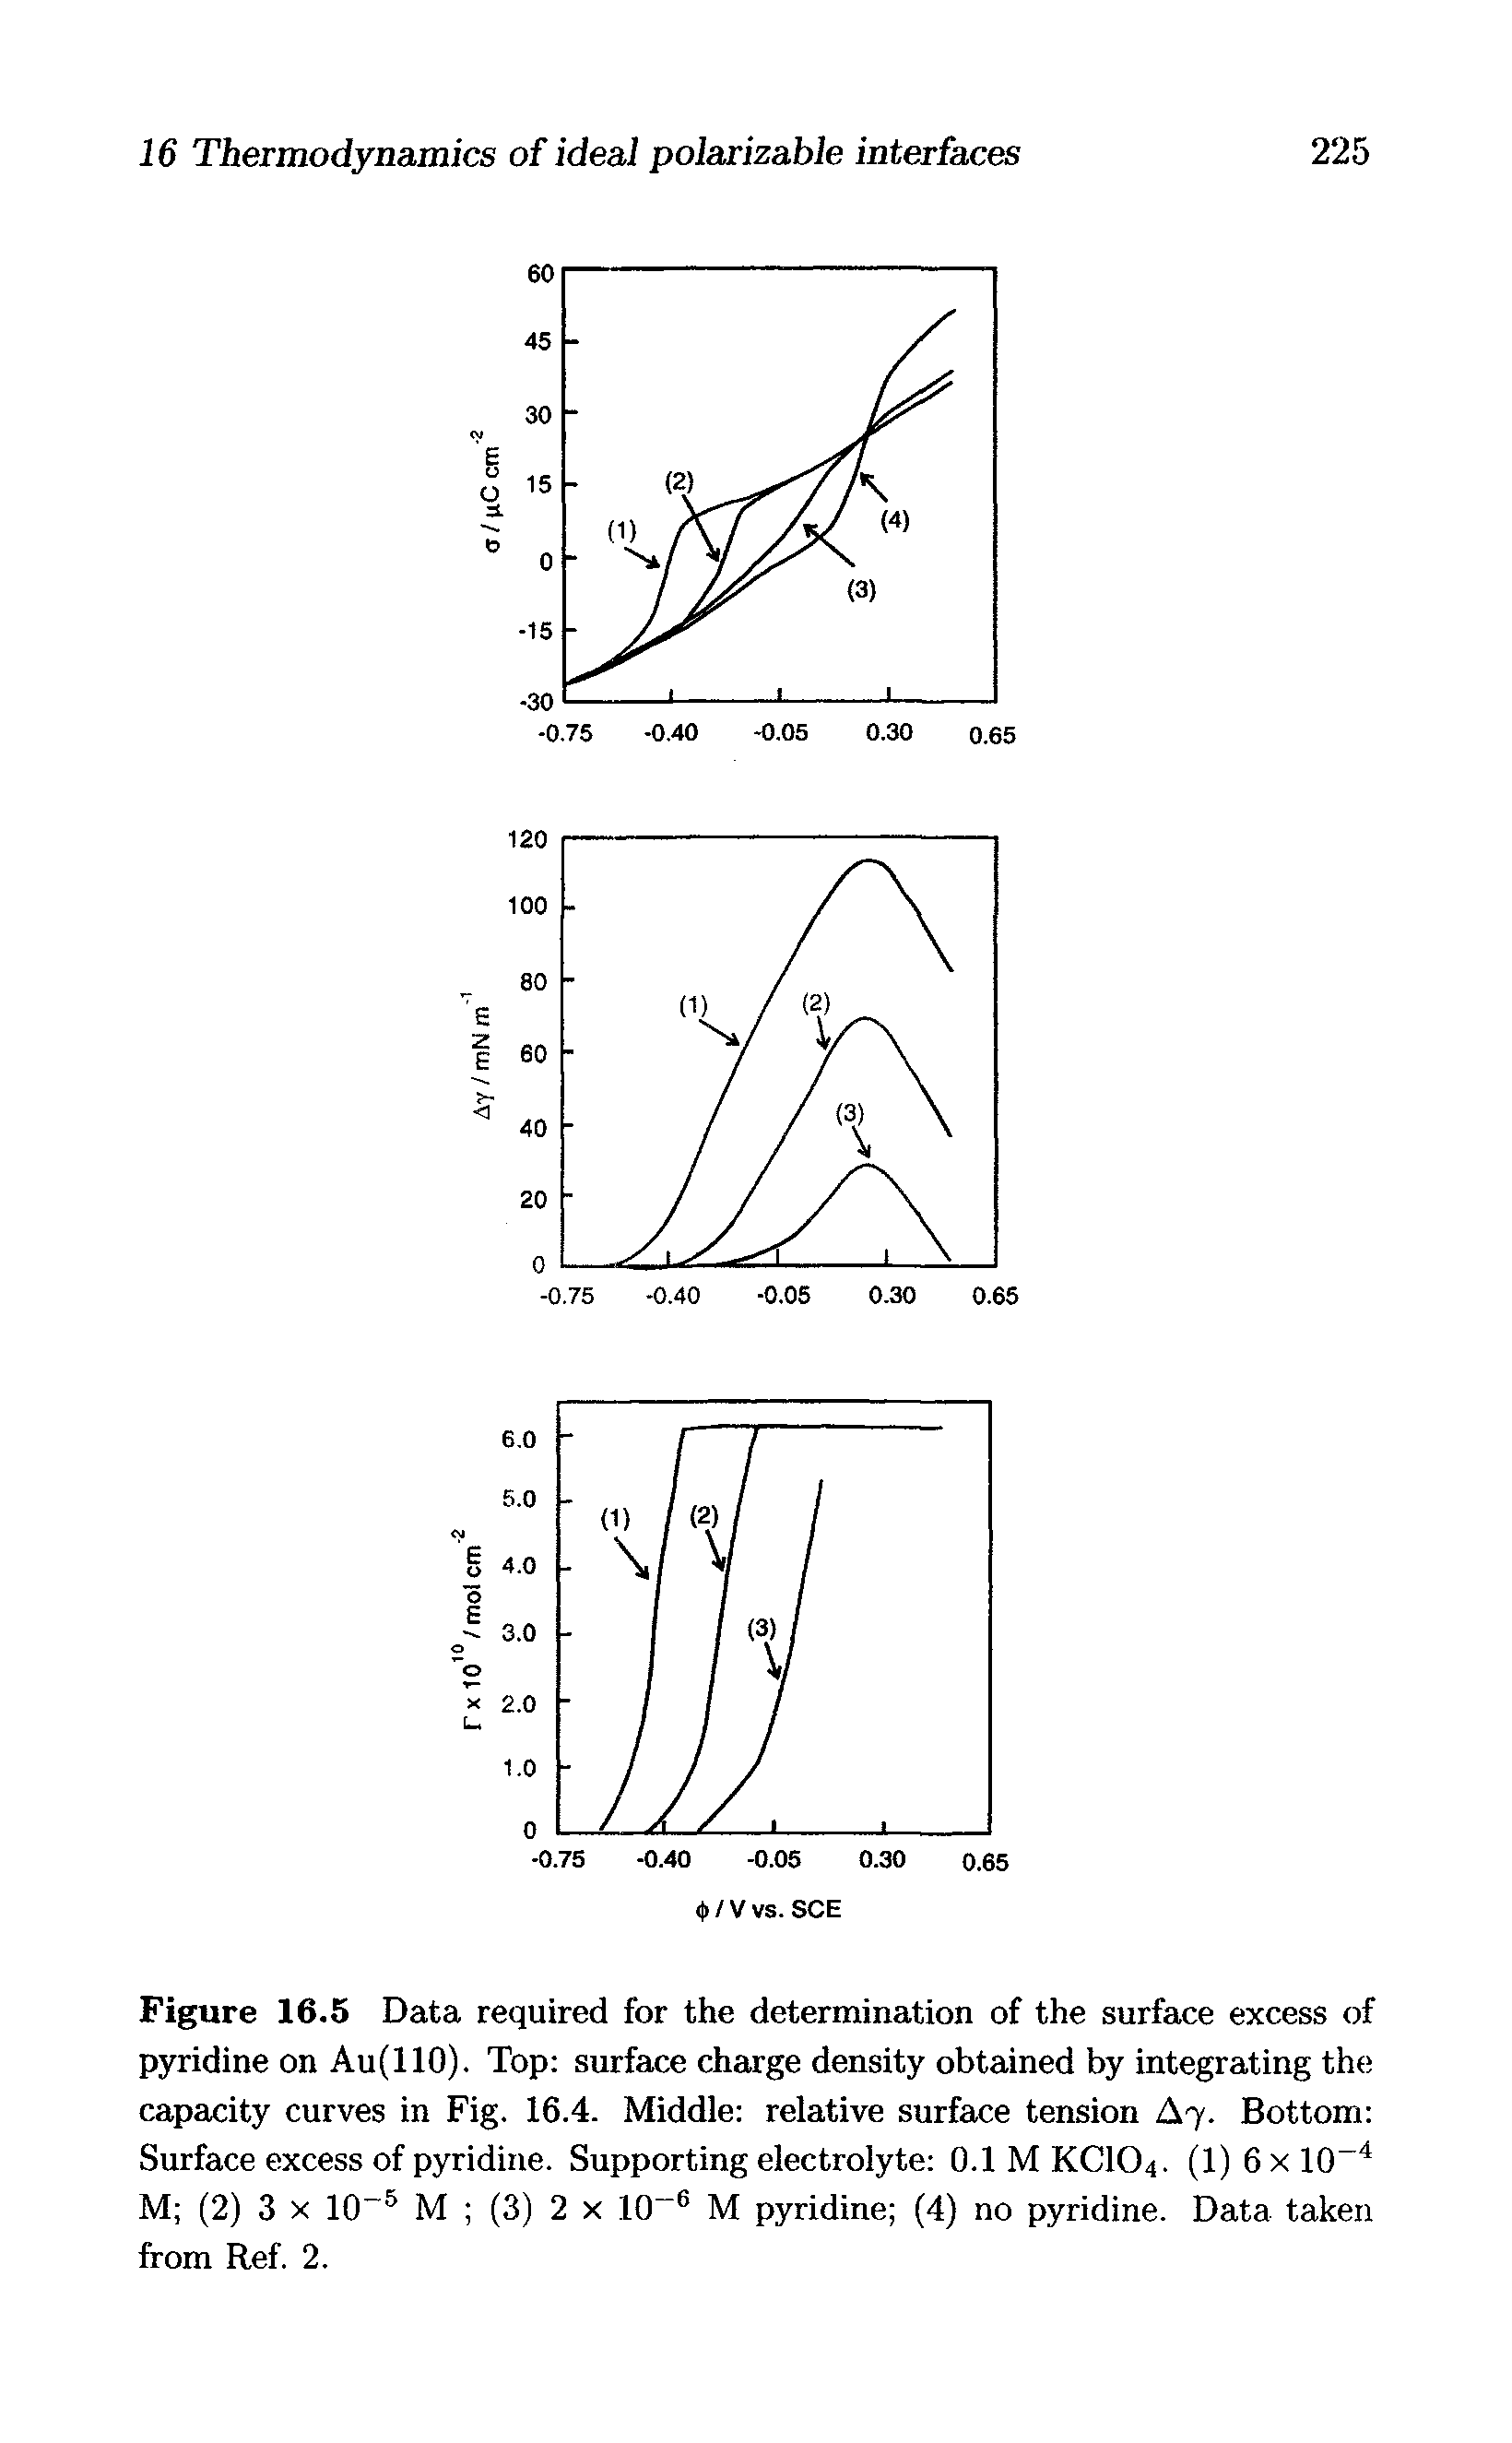 Figure 16.5 Data required for the determination of the surface excess of pyridine on Au(110). Top surface charge density obtained by integrating the capacity curves in Fig. 16.4. Middle relative surface tension A7. Bottom Surface excess of pyridine. Supporting electrolyte 0.1 M KCIO4. (1) 6 x 10 4 M (2) 3 x 10 5 M (3) 2 x 10 6 M pyridine (4) no pyridine. Data taken from Ref. 2.